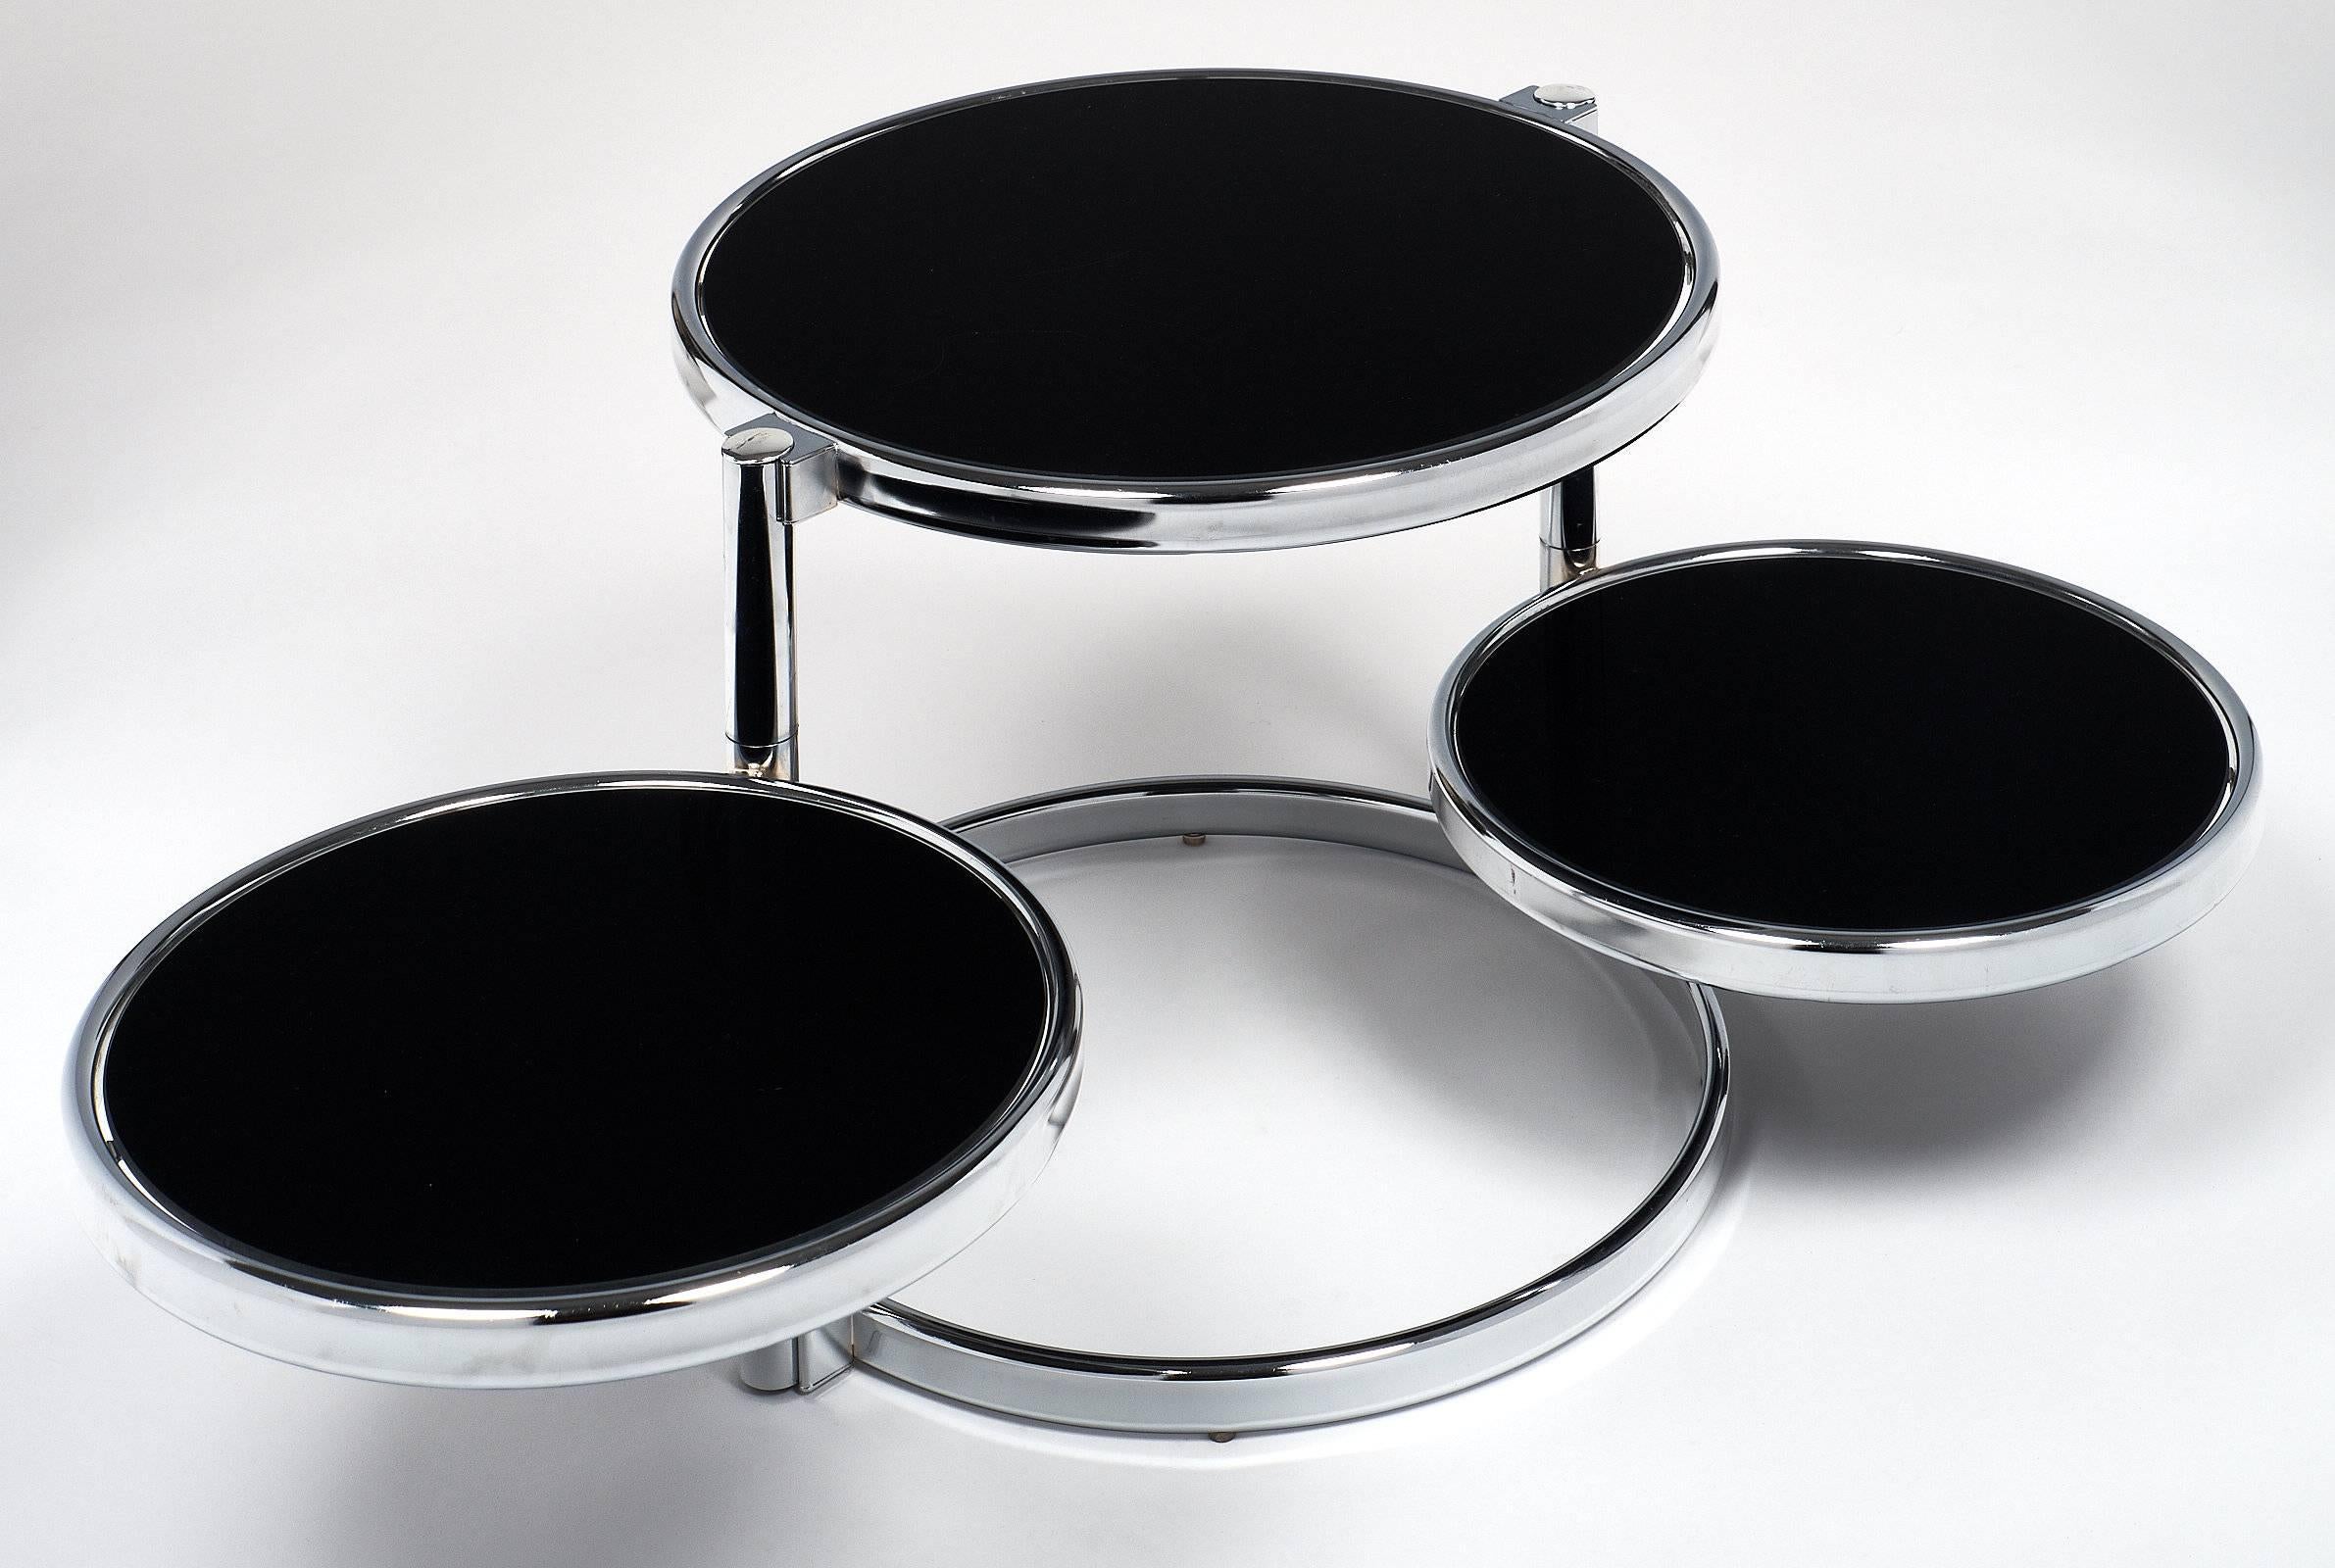 Polished chrome and black glass modern side table. This piece has a circular top, with two shelves that can be turned below the top or pulled out for use. Each surface has black glass for a modernist, elegant look. The shelves each have a diameter